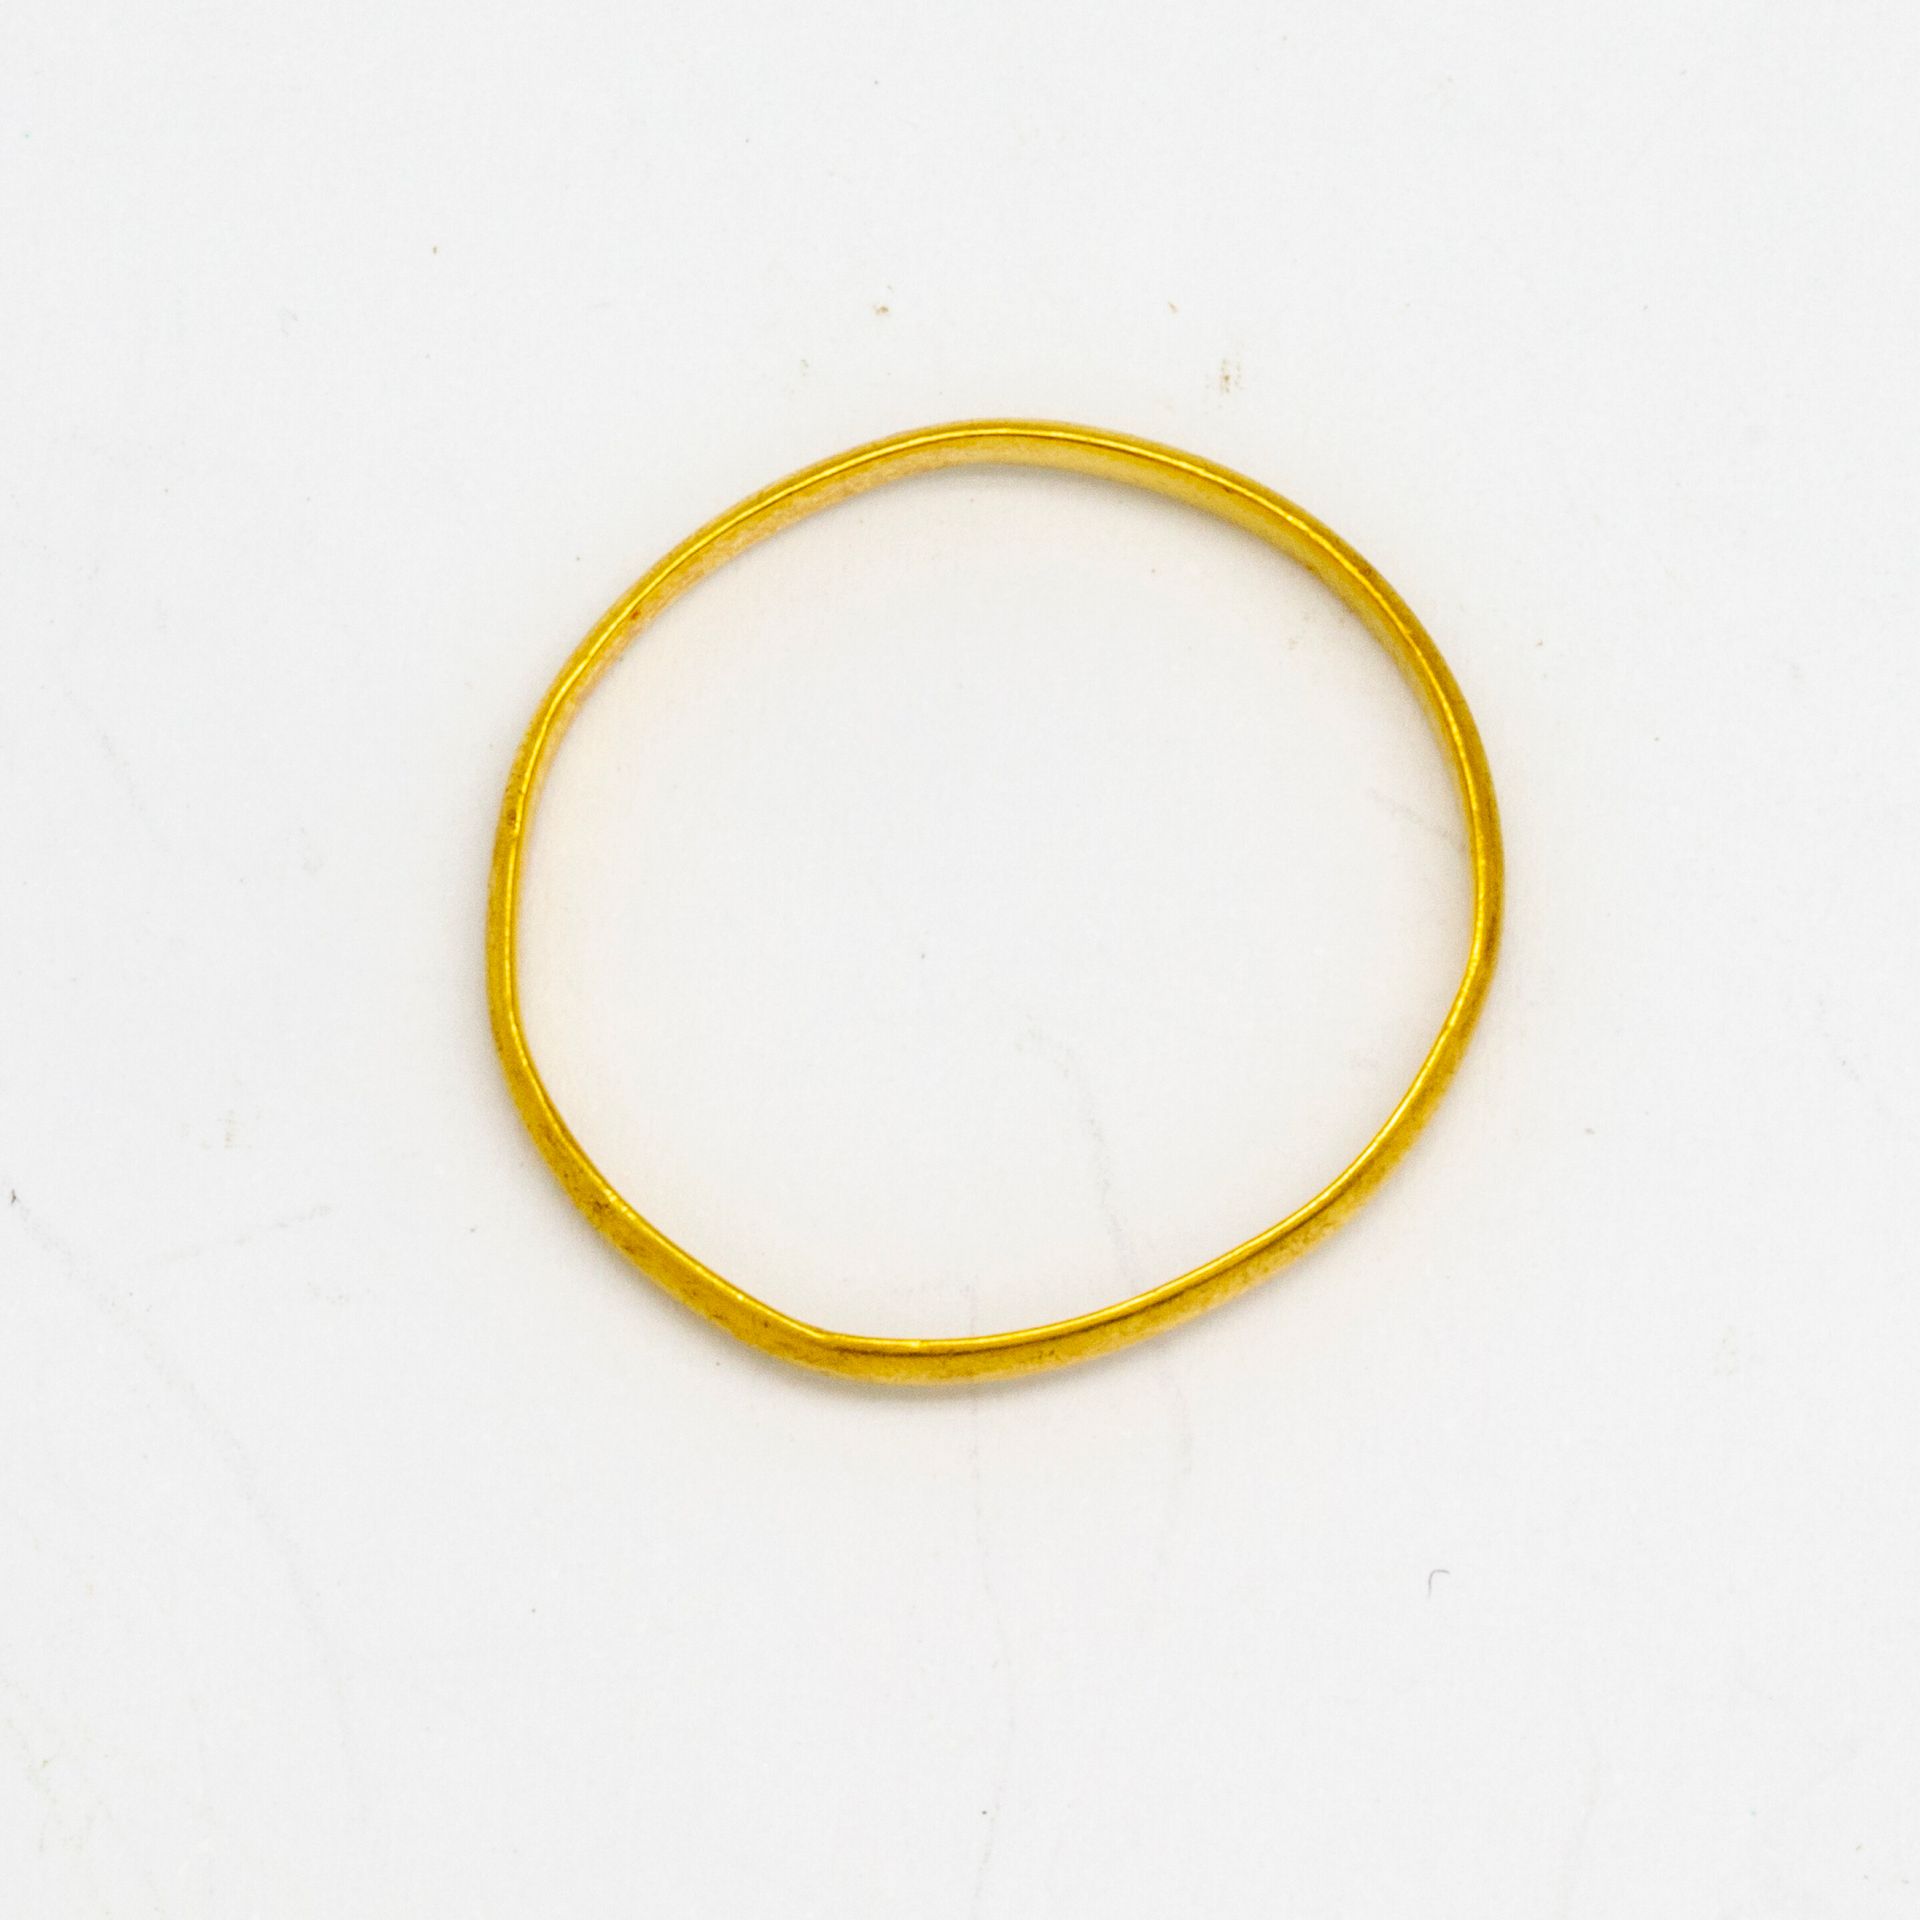 Null Yellow gold wedding band 
weight : 1,4 g